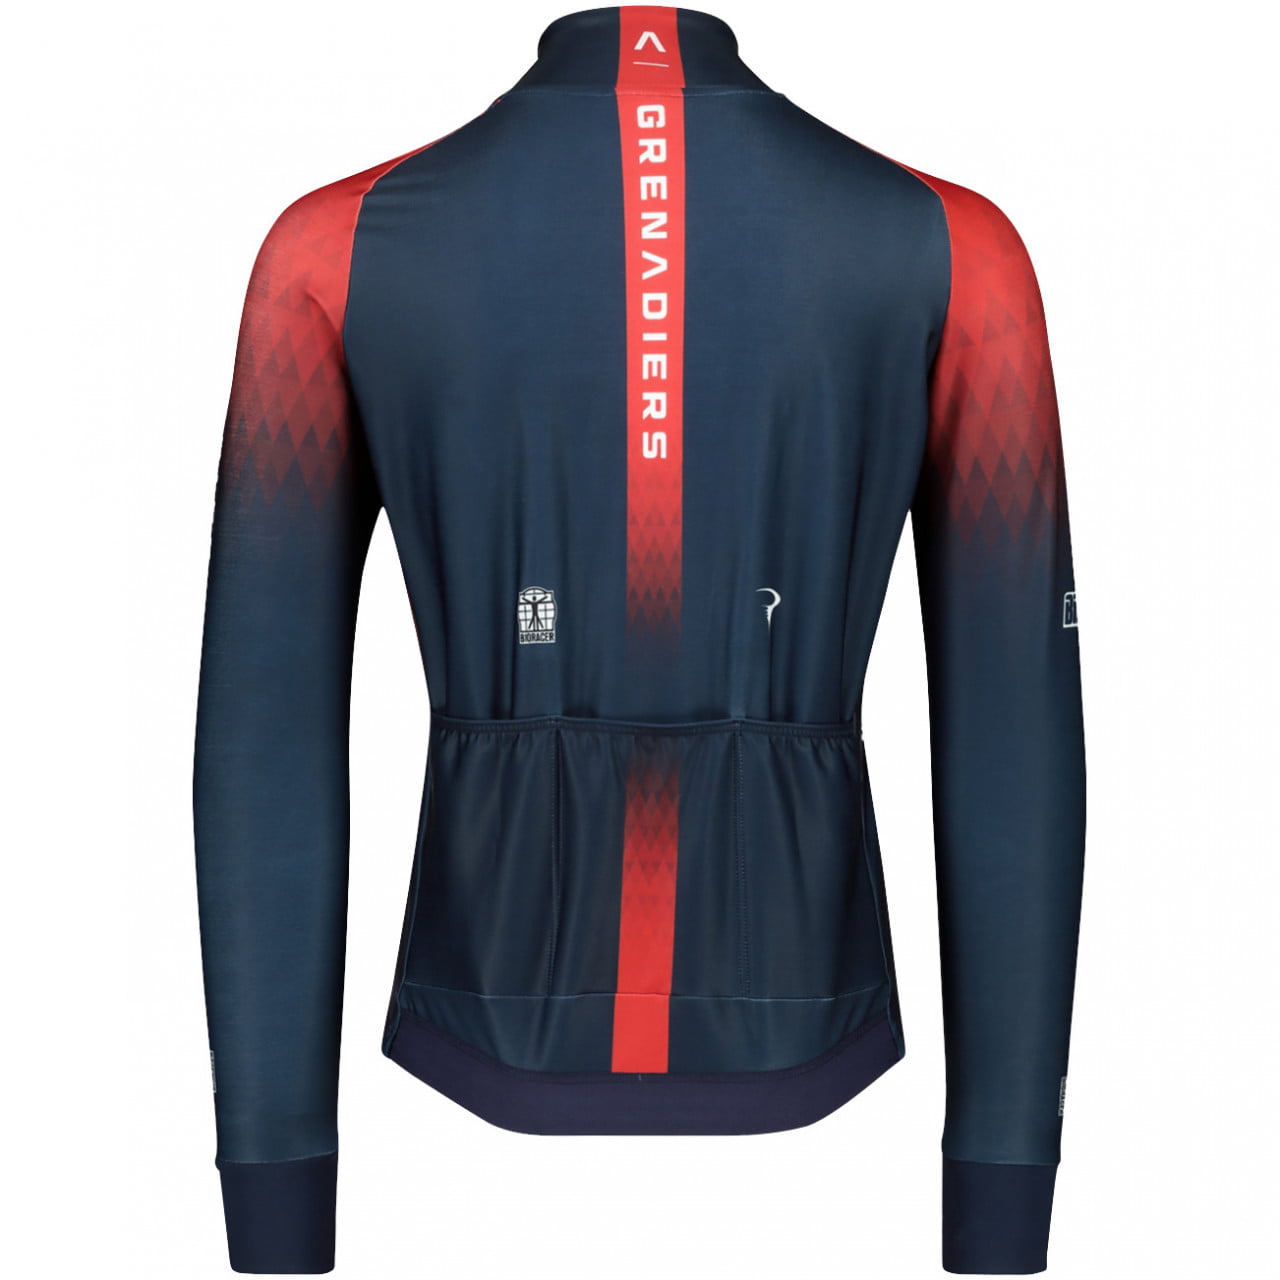 INEOS Grenadiers Jersey Jacket Icon Tempest 2022